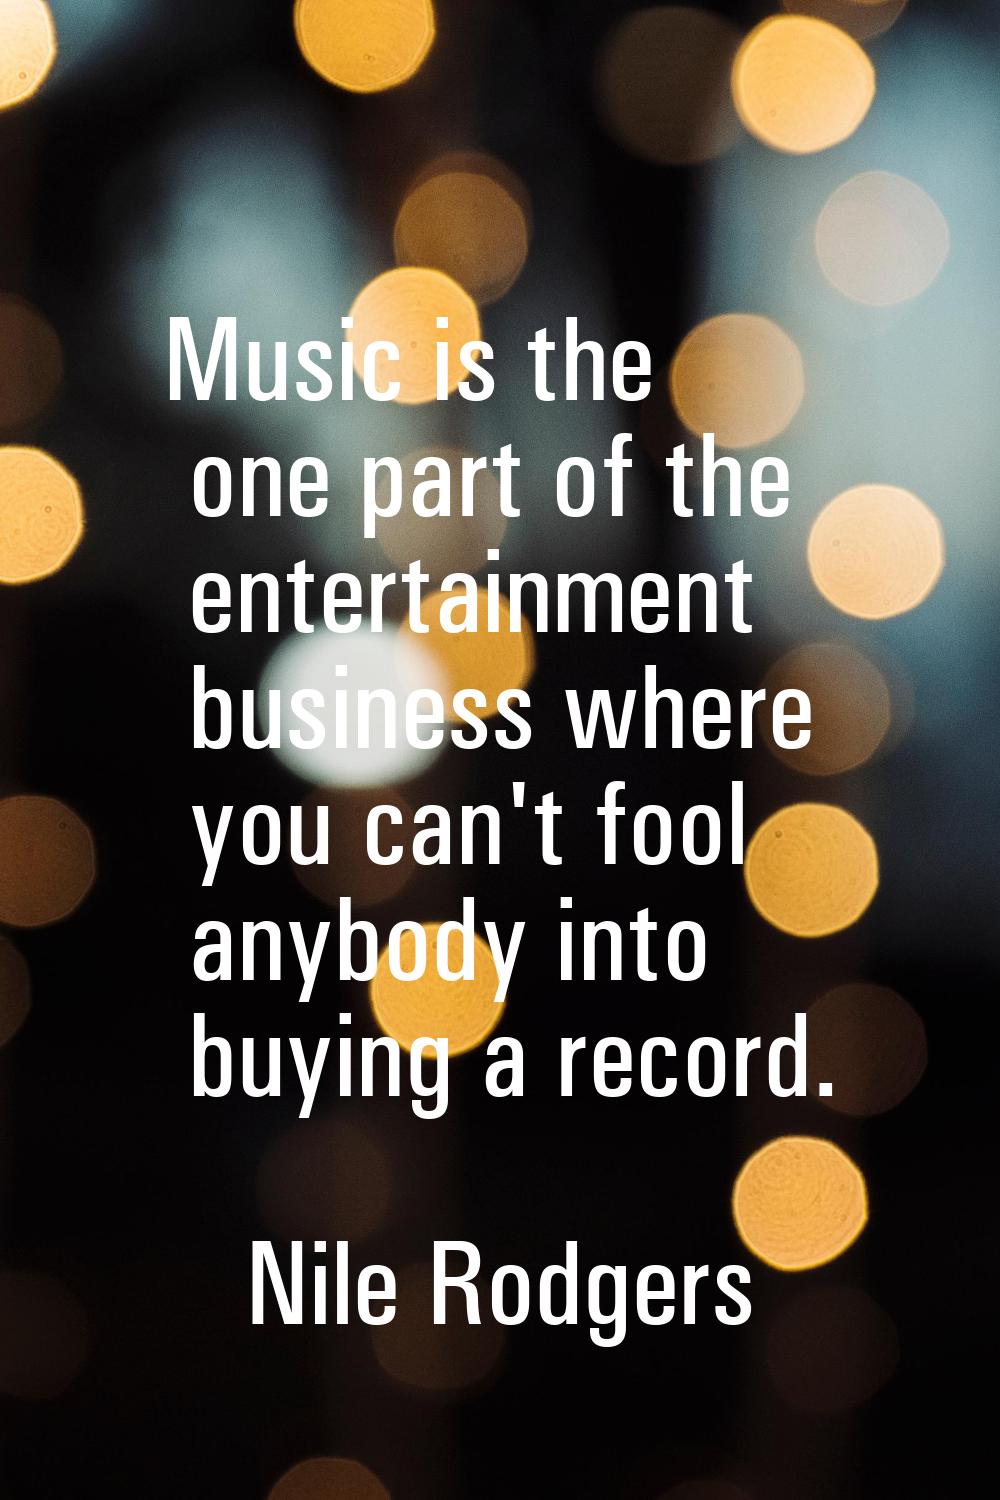 Music is the one part of the entertainment business where you can't fool anybody into buying a reco